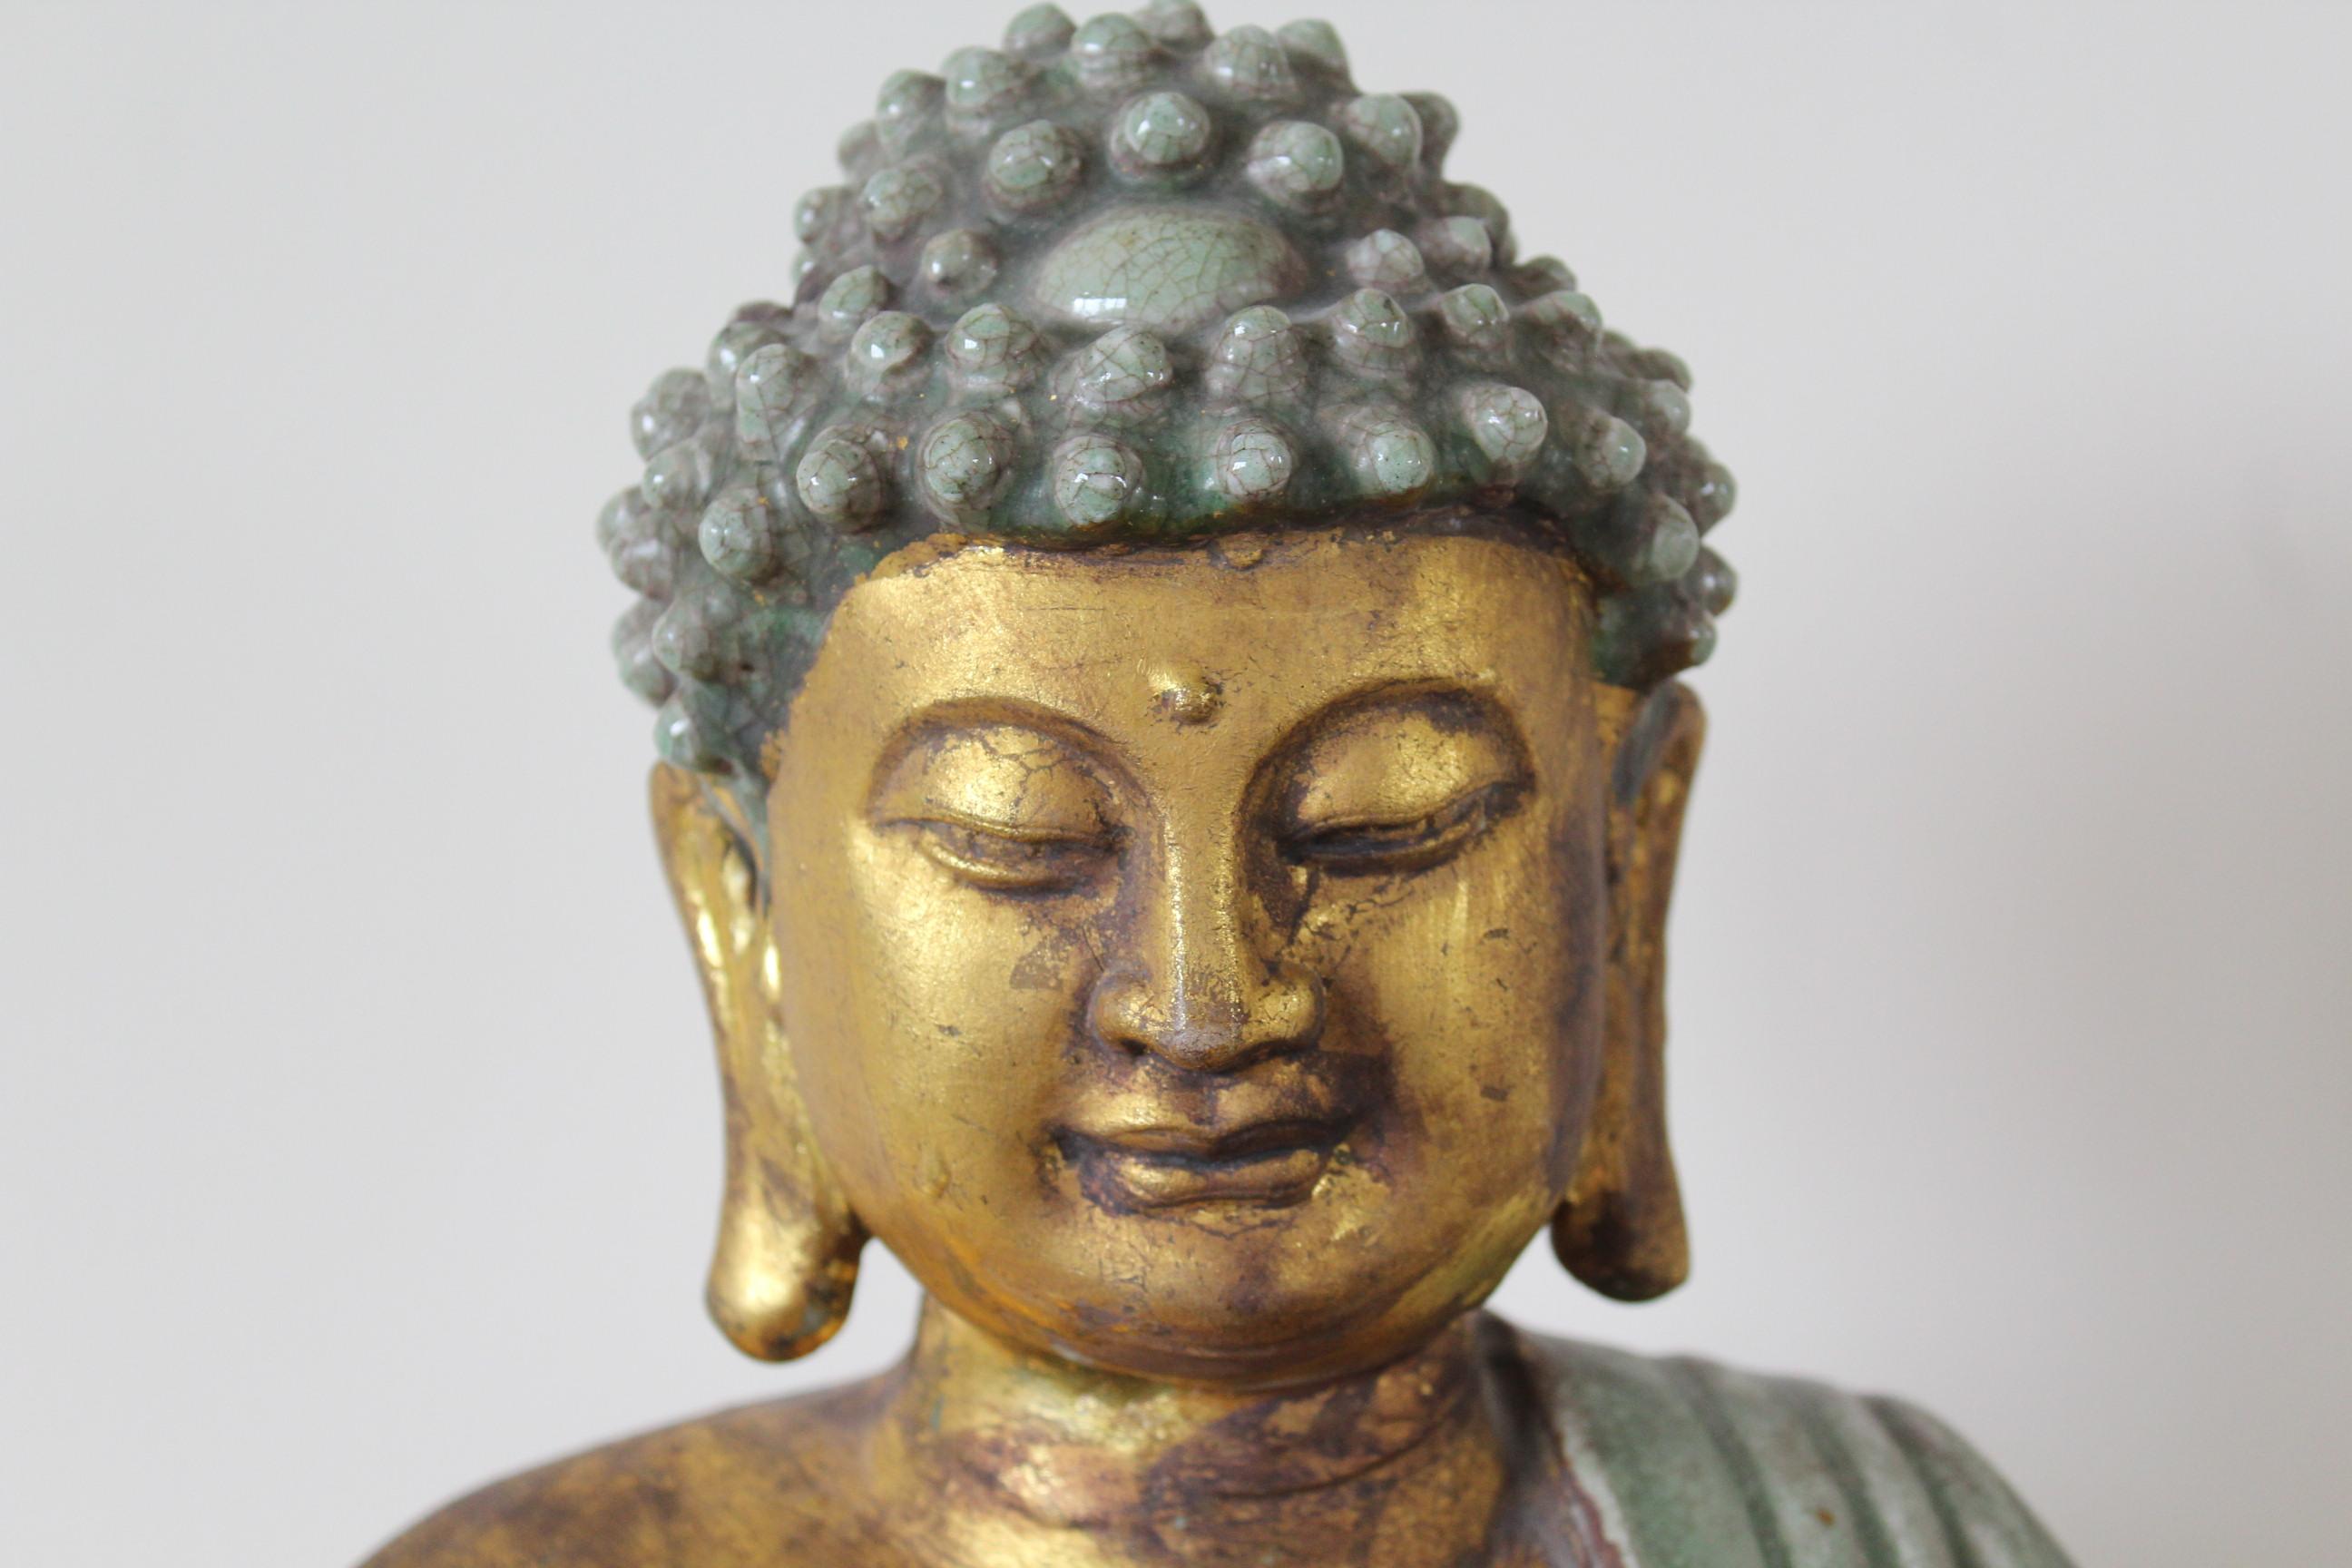 A tranquil light green glaze with gold leaf adorn this sitting Buddha statue in meditation position. Bringing happiness and good fortune this Buddha is seated with legs crossed with his right hand lowered, long fingers joining downward in the earth